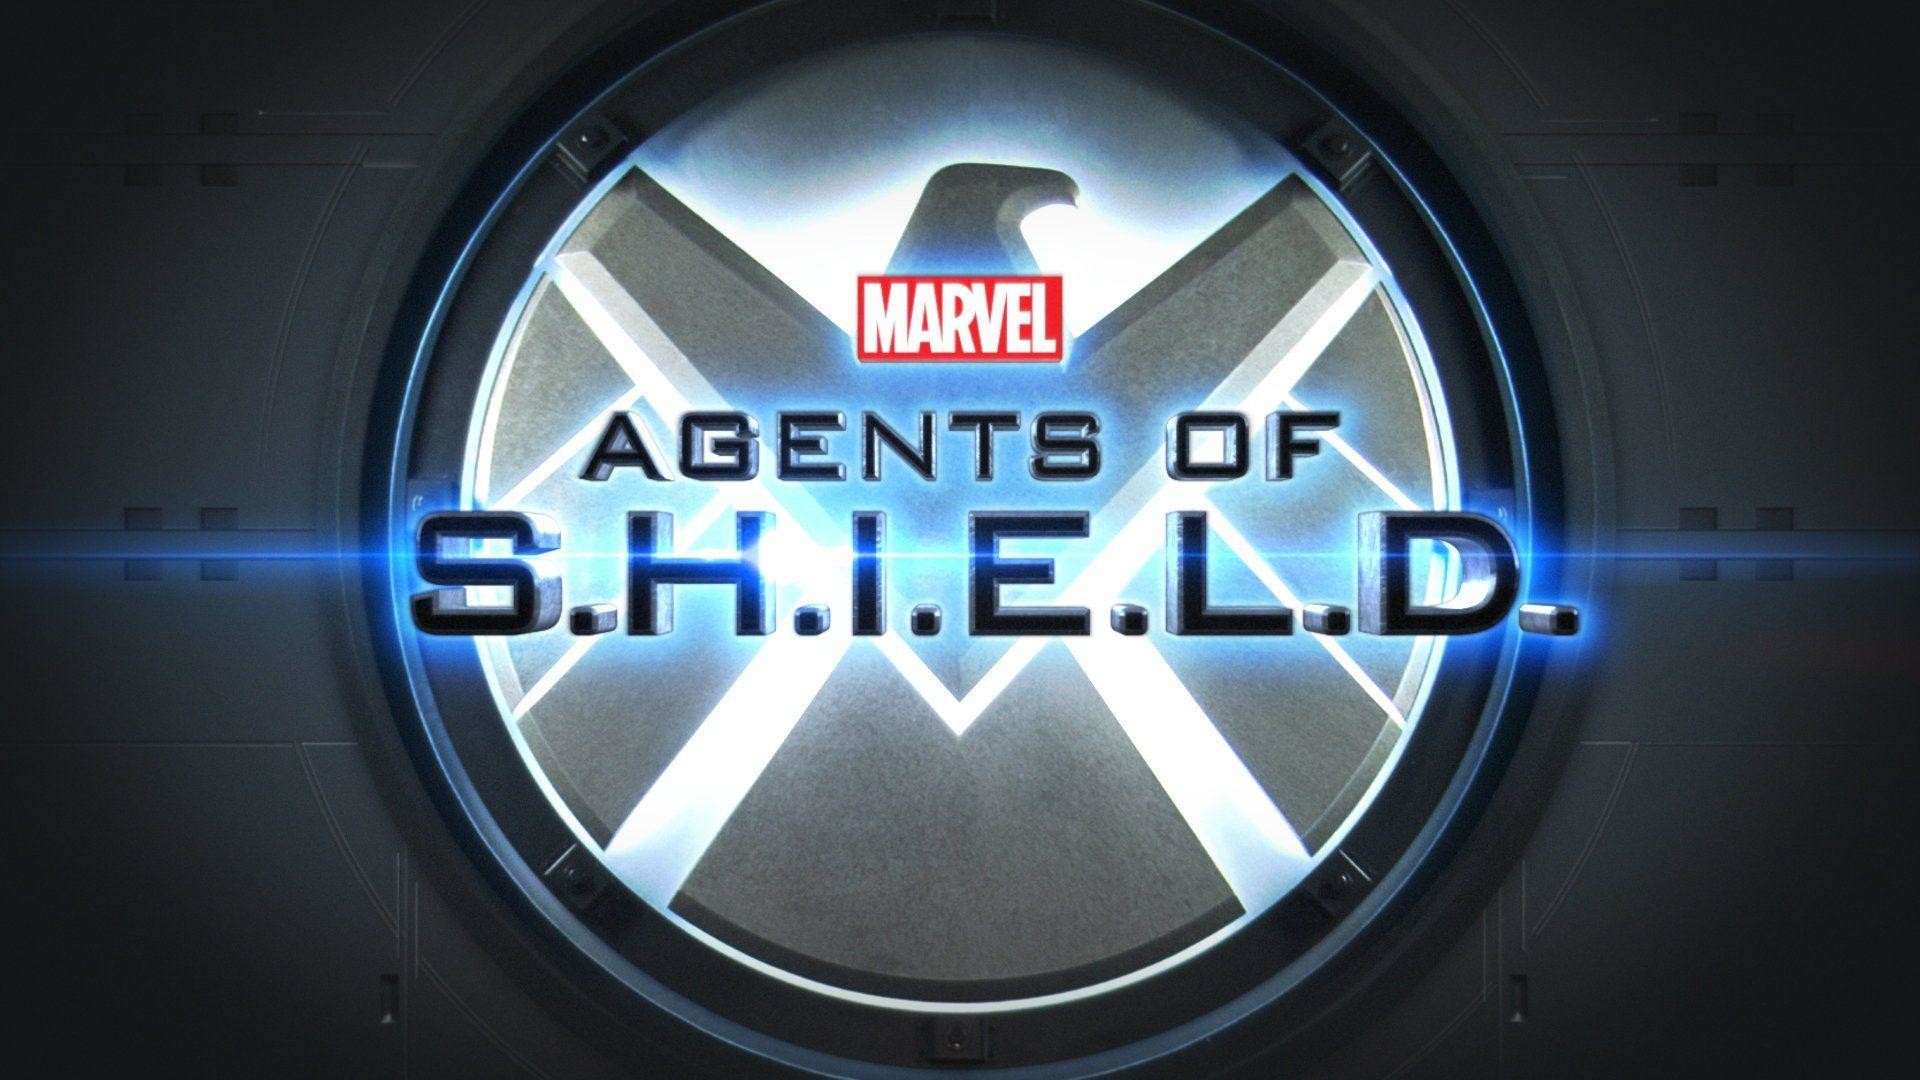 63 Marvel's Agents Of S.H.I.E.L.D. HD Wallpapers | Backgrounds .